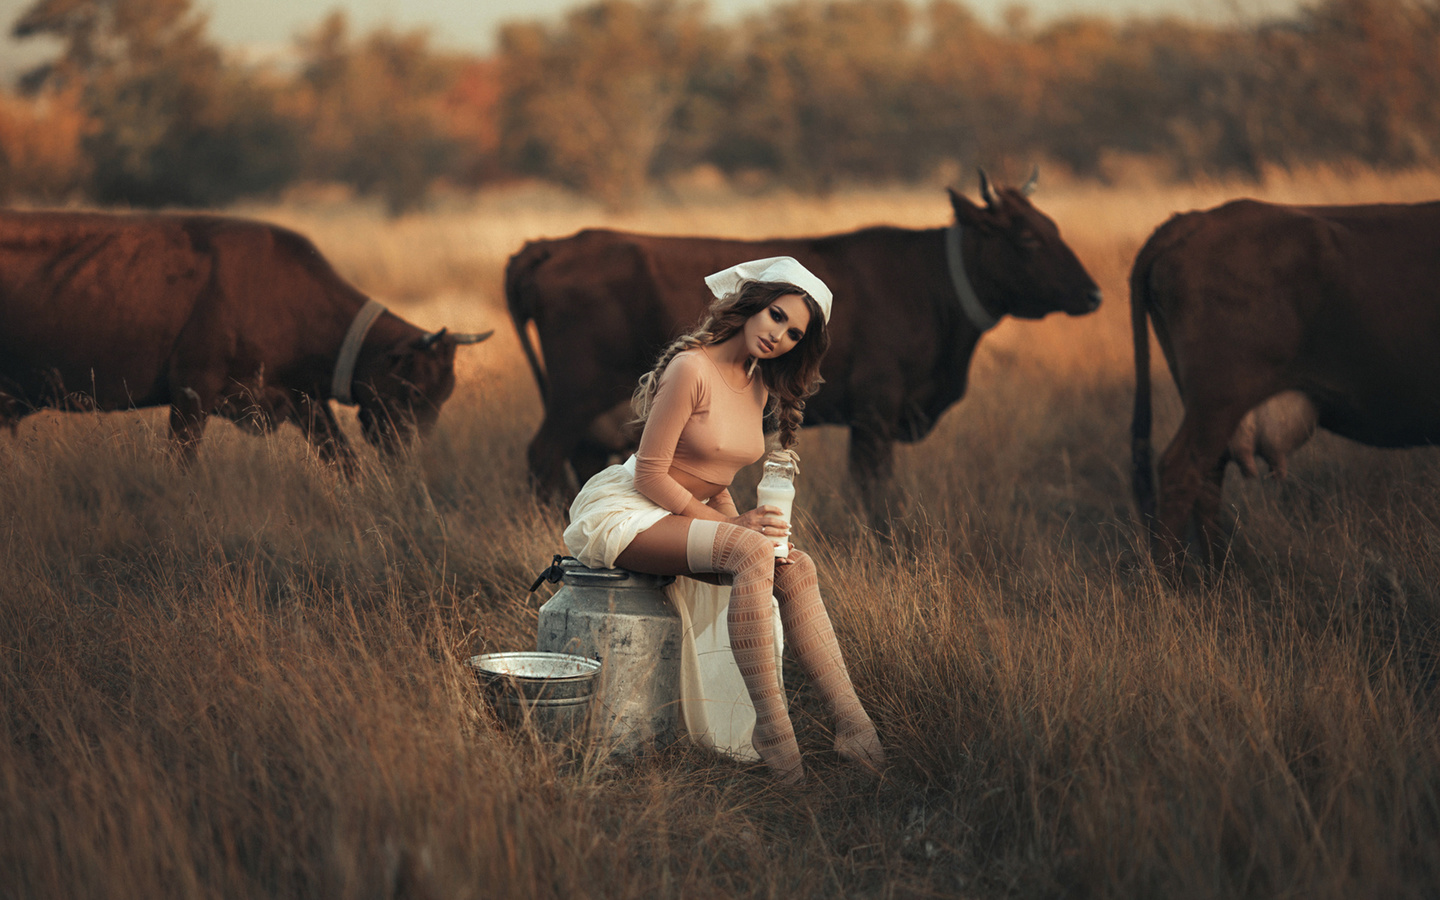 women, sitting, stockings, shirt, pigtails, tanned, depth of field, nipple through clothing, women outdoors, cow